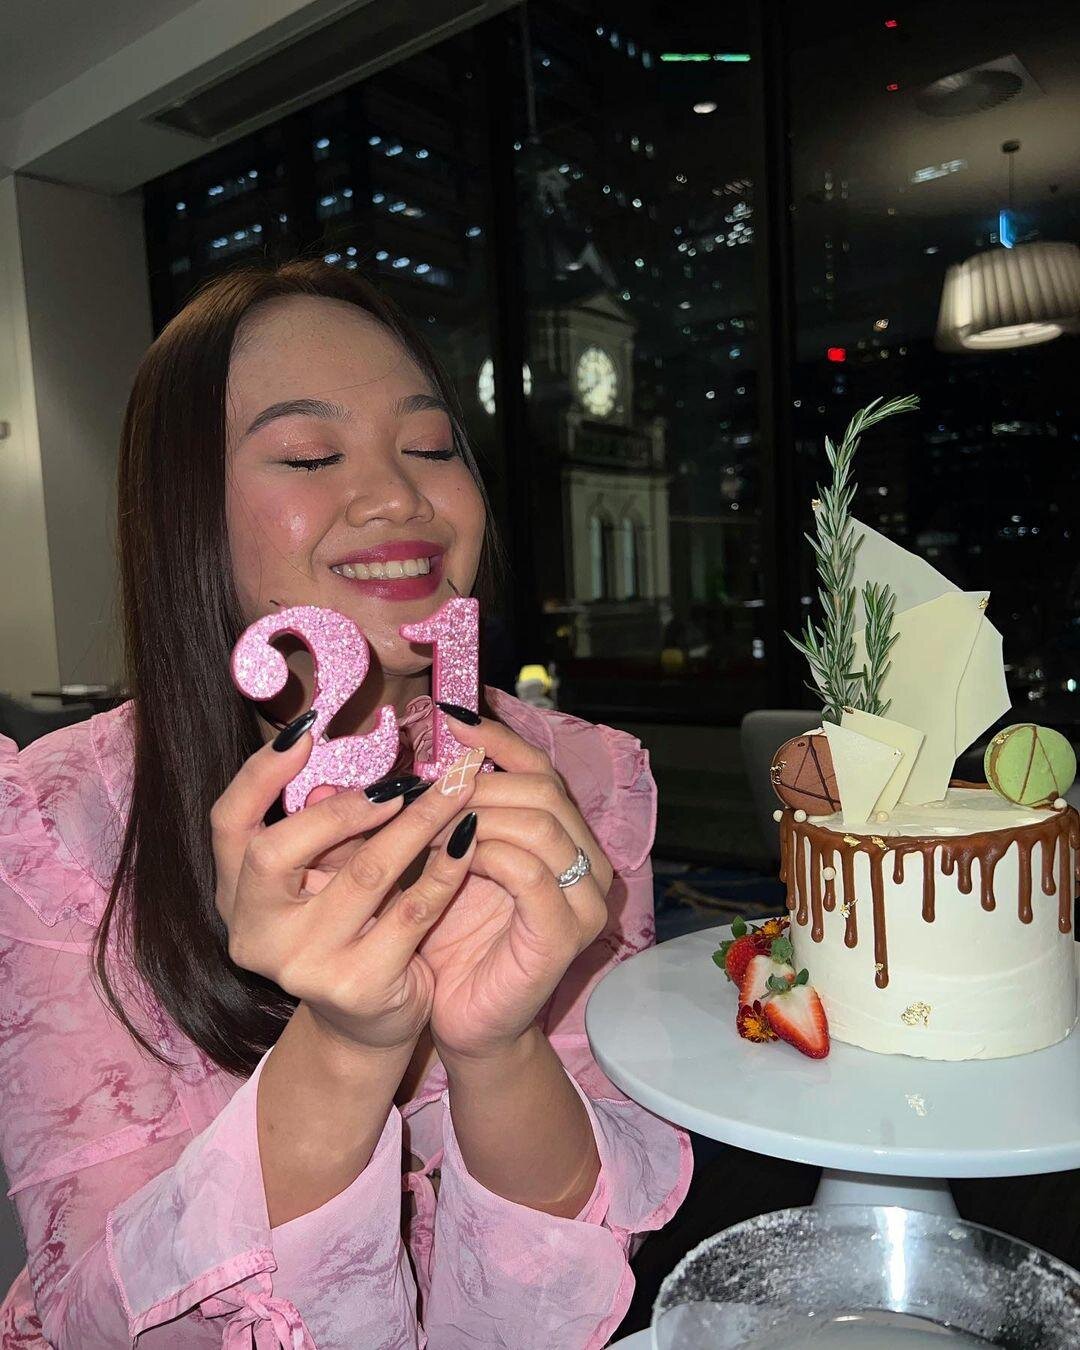 Celebrating a special occasion? Or perhaps dining with a group? When making a booking at @SofitelBrisbaneCentral's Suzette restaurant add-on one of our range of celebration cakes to finish the meal in style. The only question is which one you'll pick